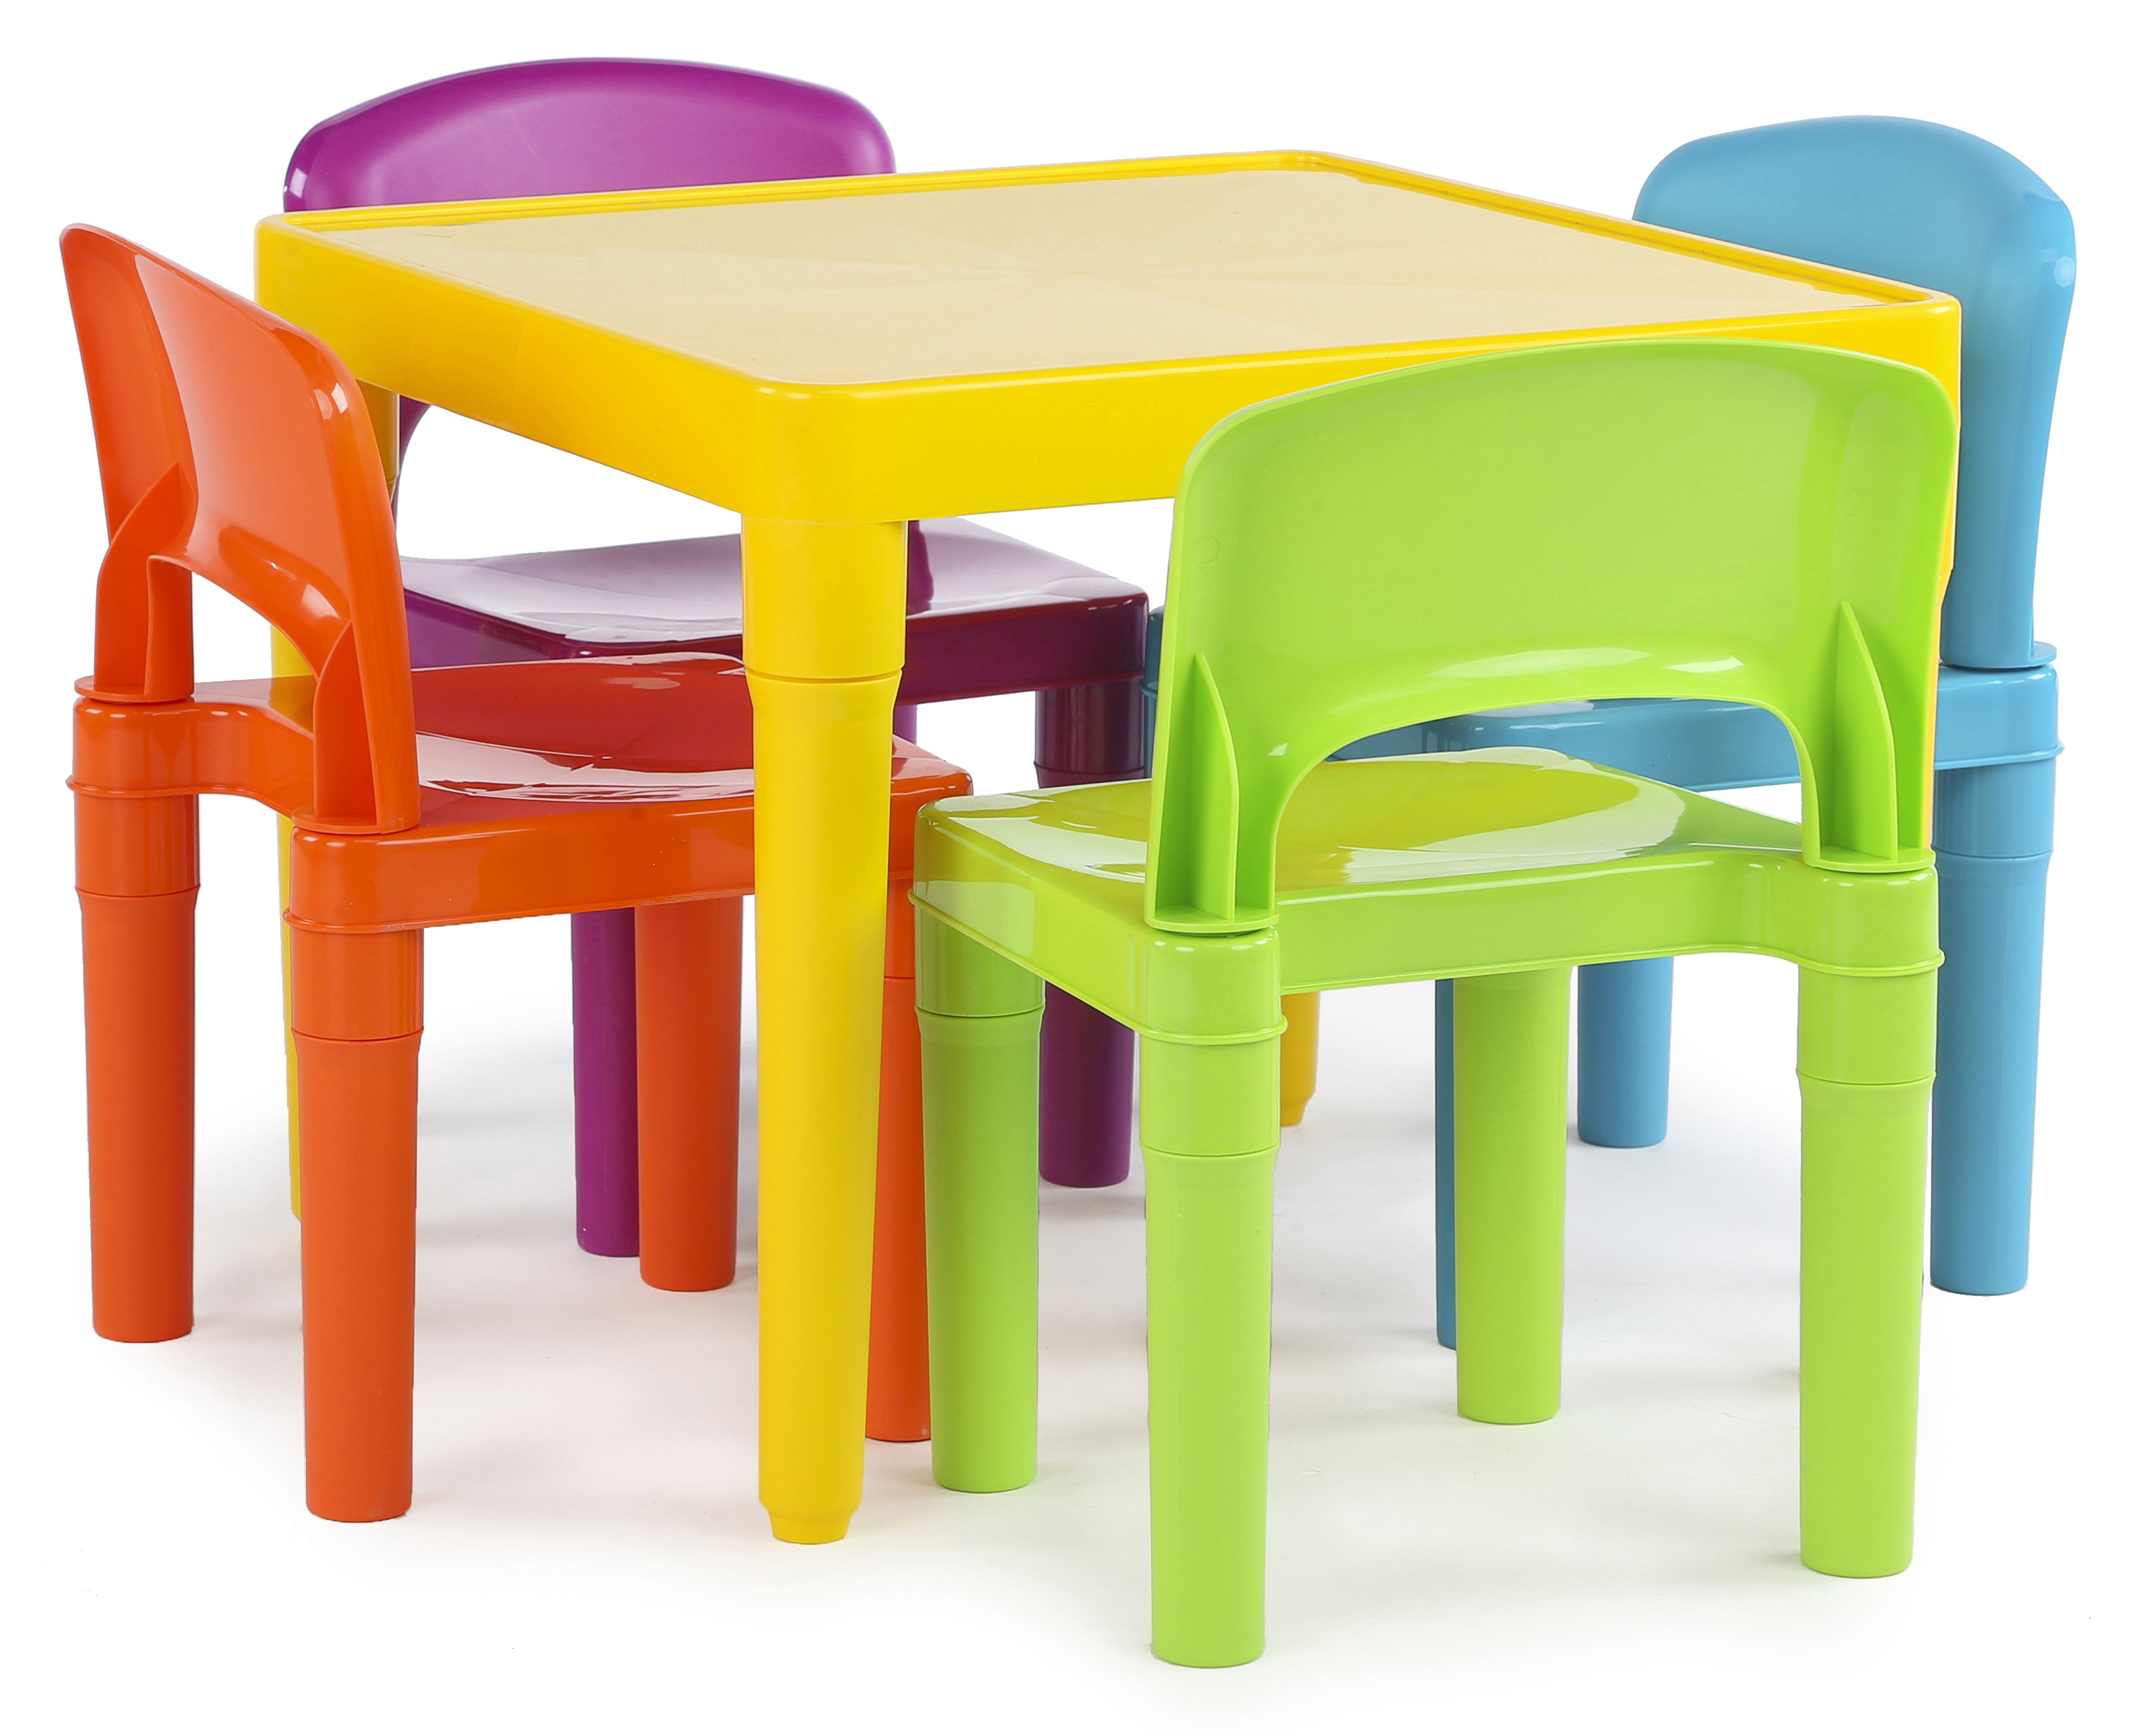 kmart childrens table and chair sets